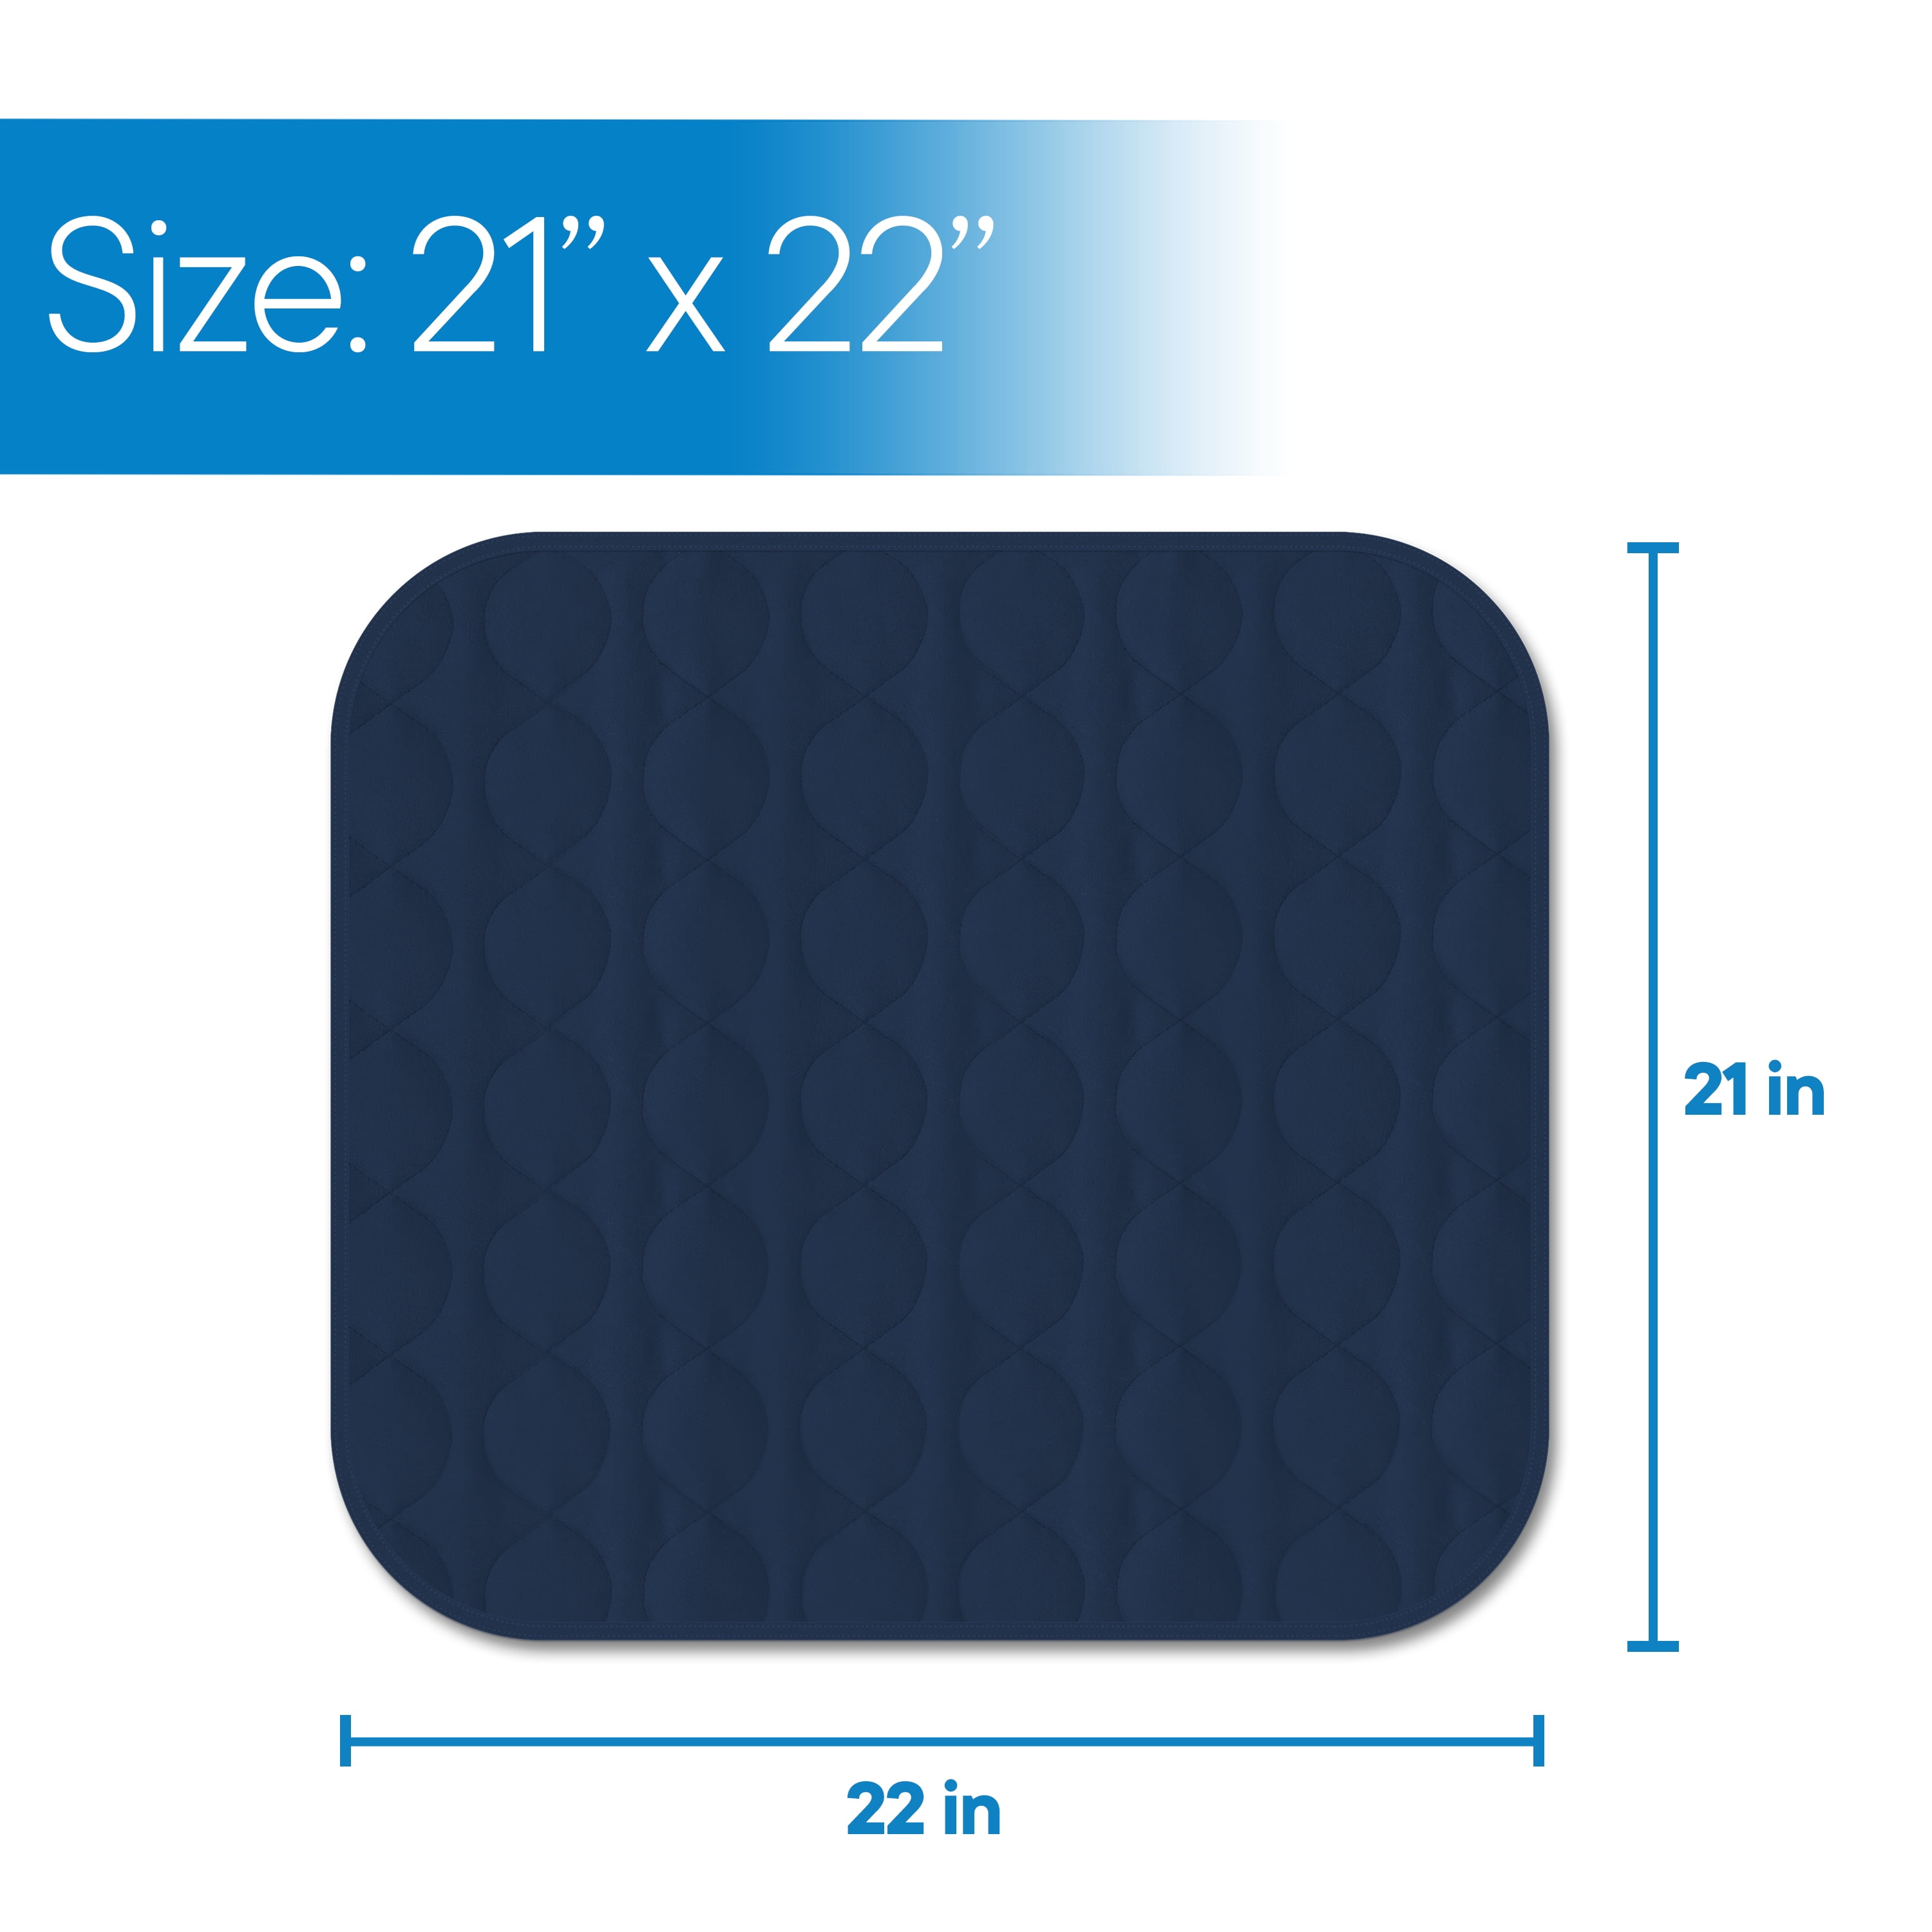 Inspire Washable Waterproof Chair Pad for Incontinence, Blue, 18 Inches x  24 Inches